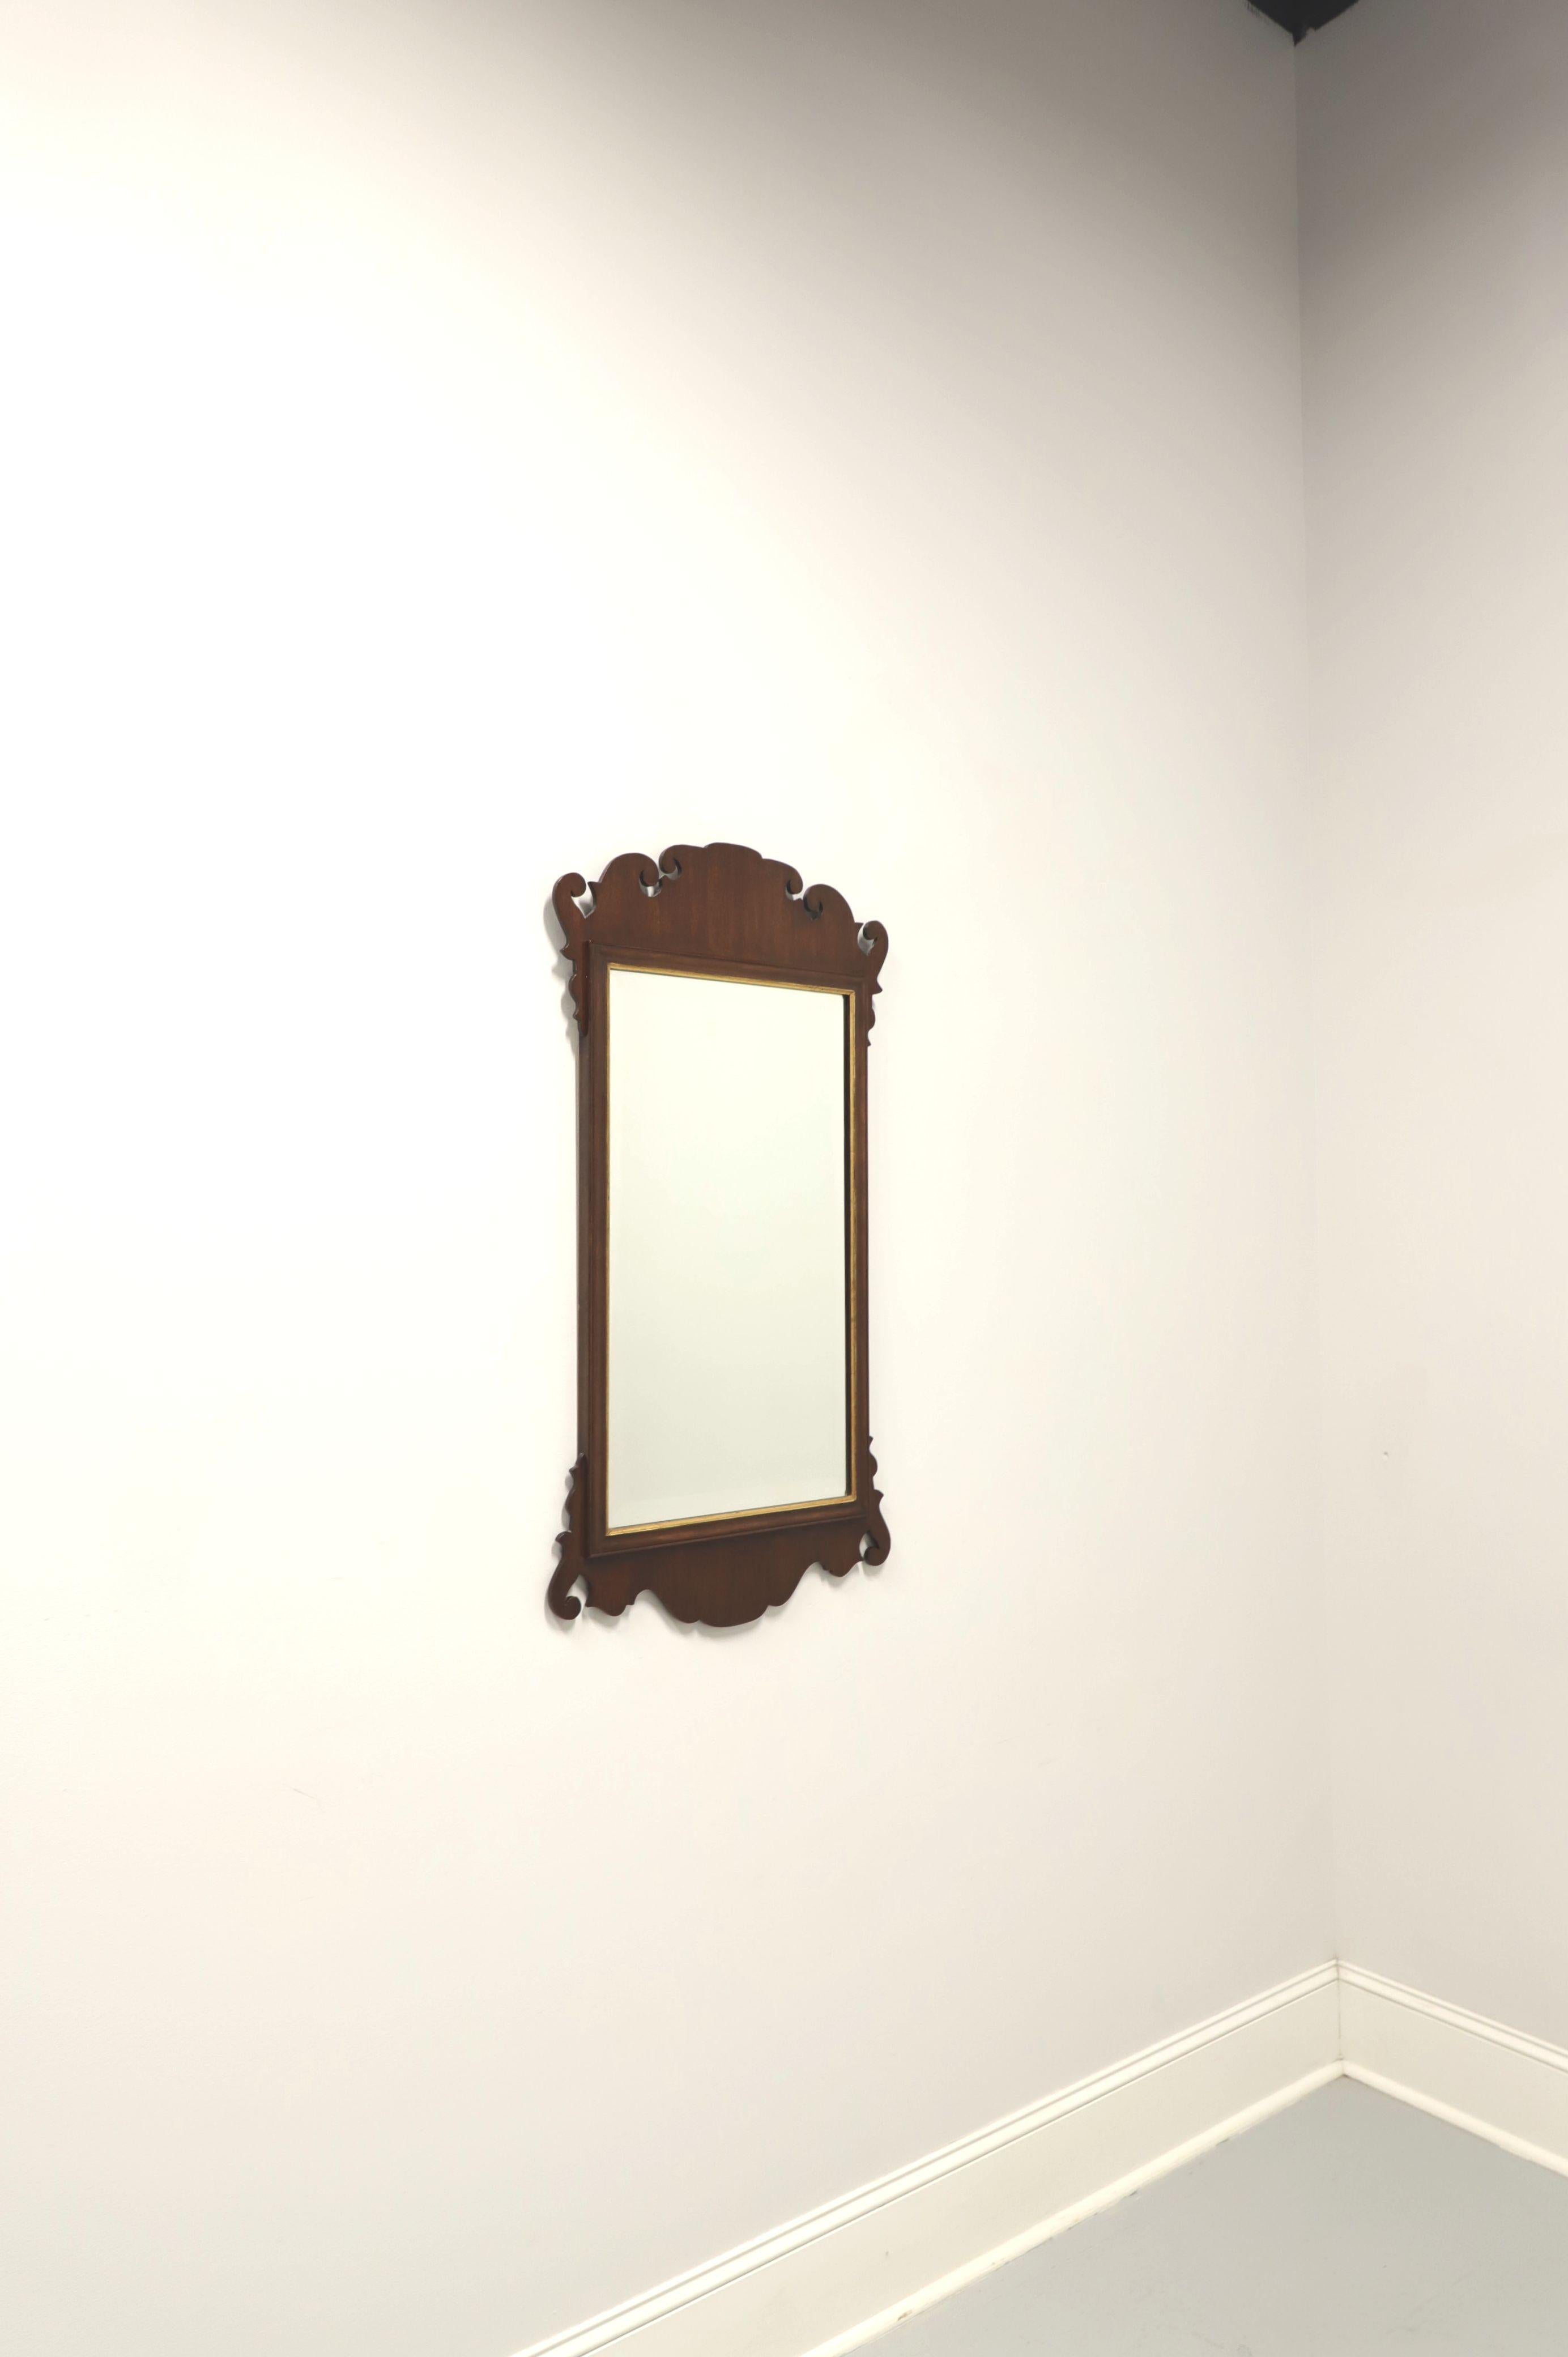 A Chippendale style wall mirror by Friedman Brothers. Beveled mirror glass, mahogany frame with gold trim around mirror and decorative carving to top & the bottom. Made in the USA, in the late 20th century.

Measures: 21.5 W 1 D 40.75 H, Weighs